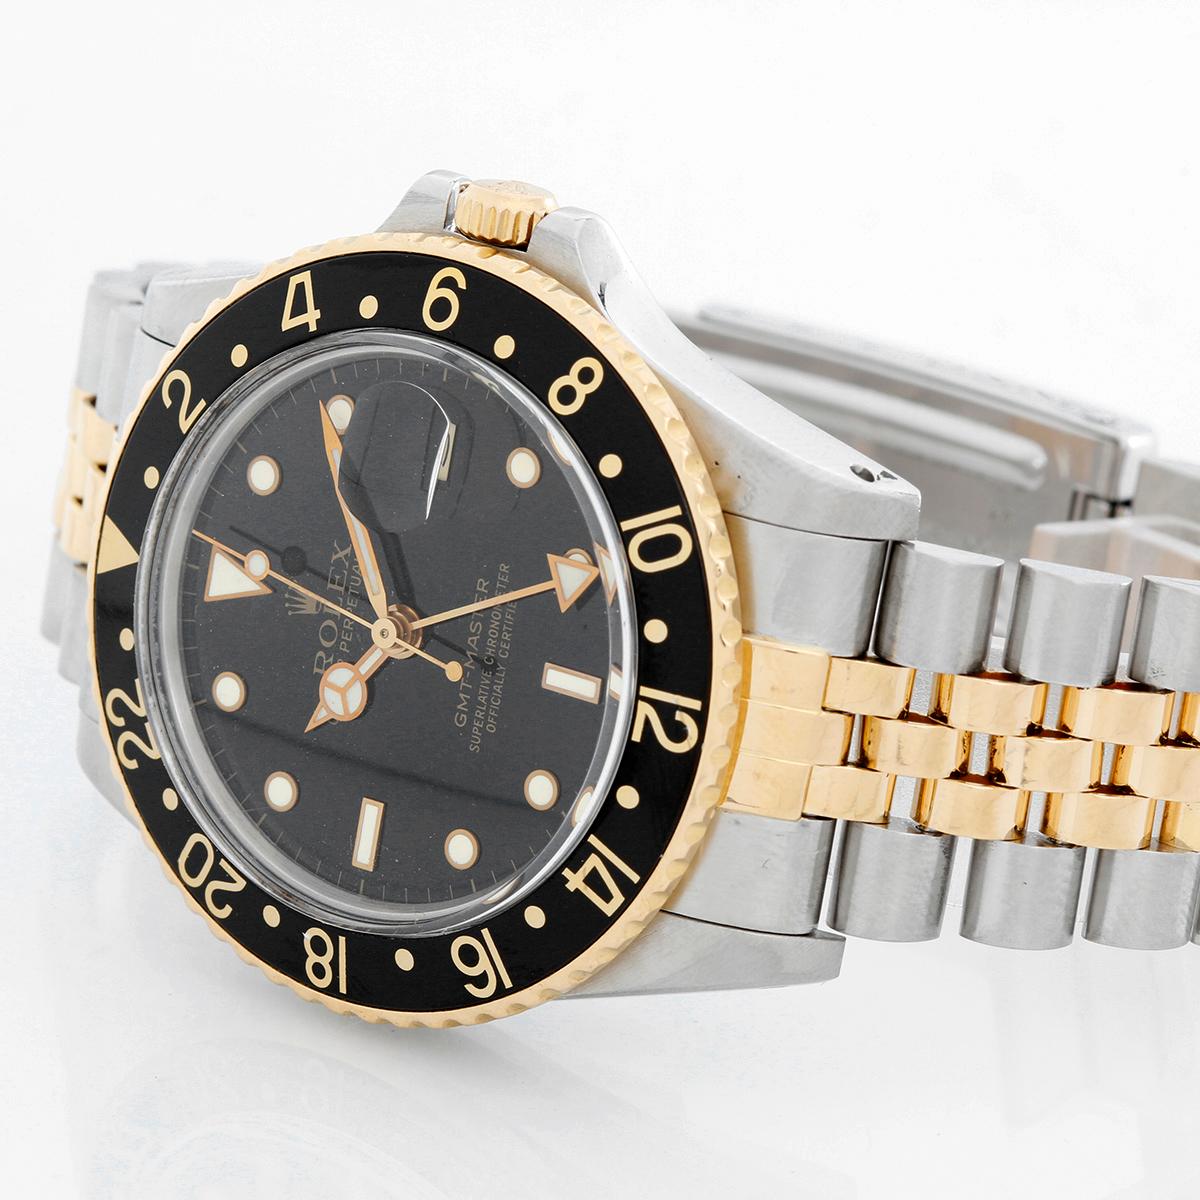 Rolex 2-Tone GMT-Master 16753 -  Automatic winding. Stainless steel with gold bezel ( 40 mm ). black dial with gold framed hour markers with date. 18K gold and steel 2-tone Rolex Jubilee bracelet with deployant clasp. Pre-owned with Rolex box.